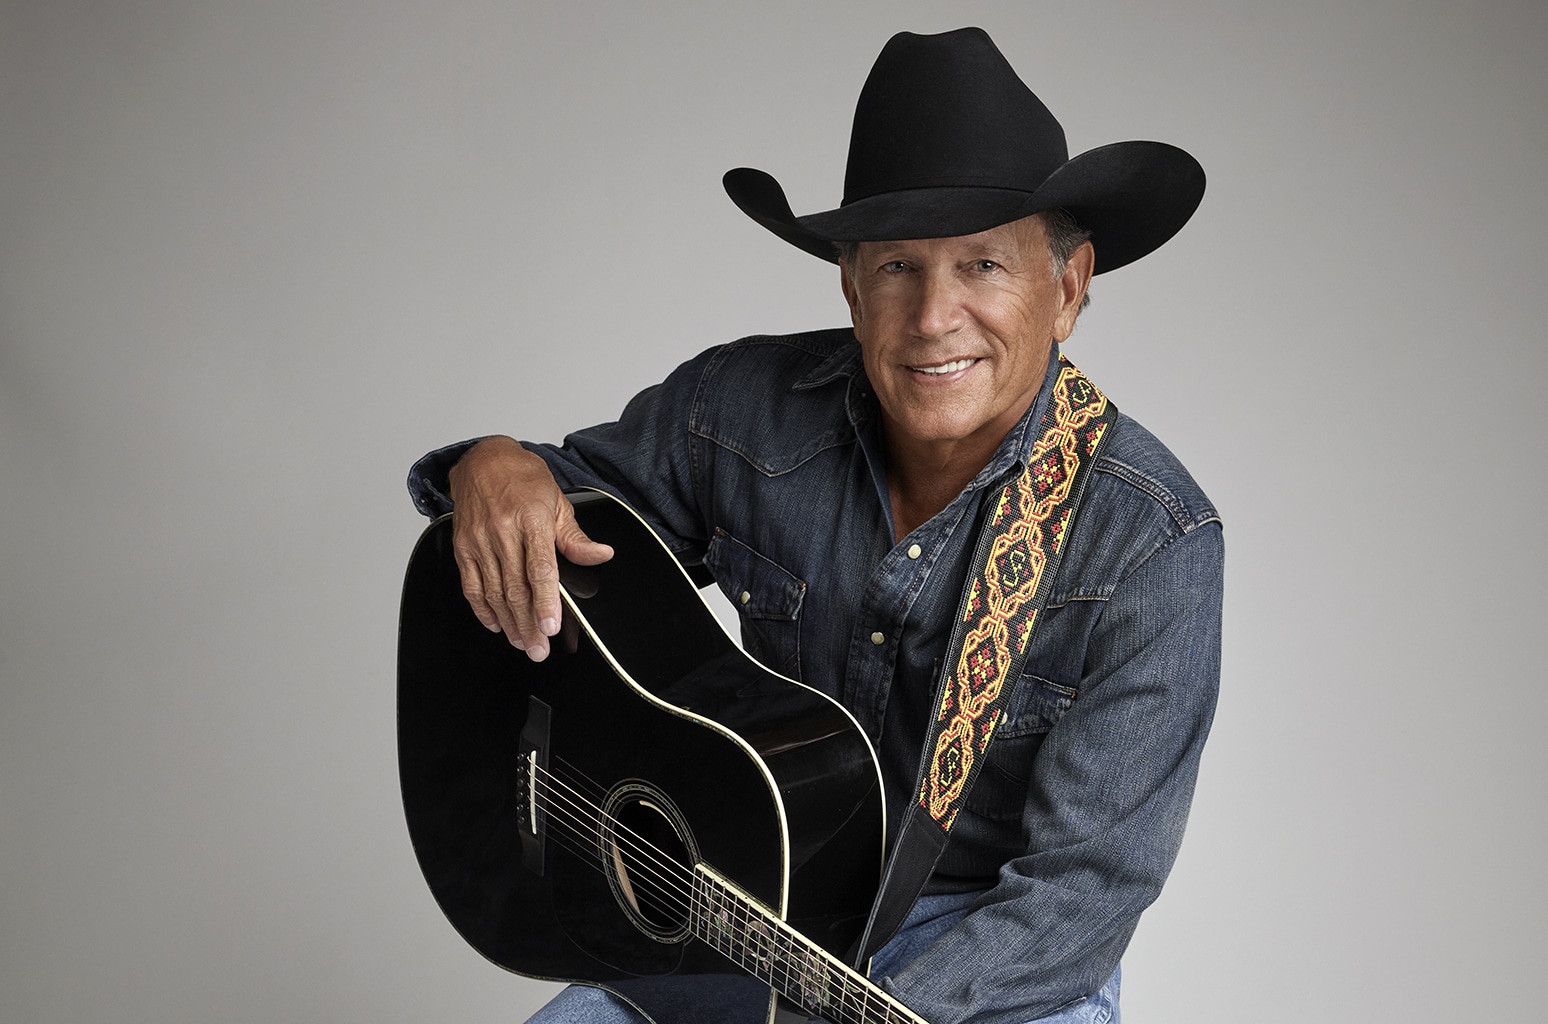 Did Strait retire from singing?